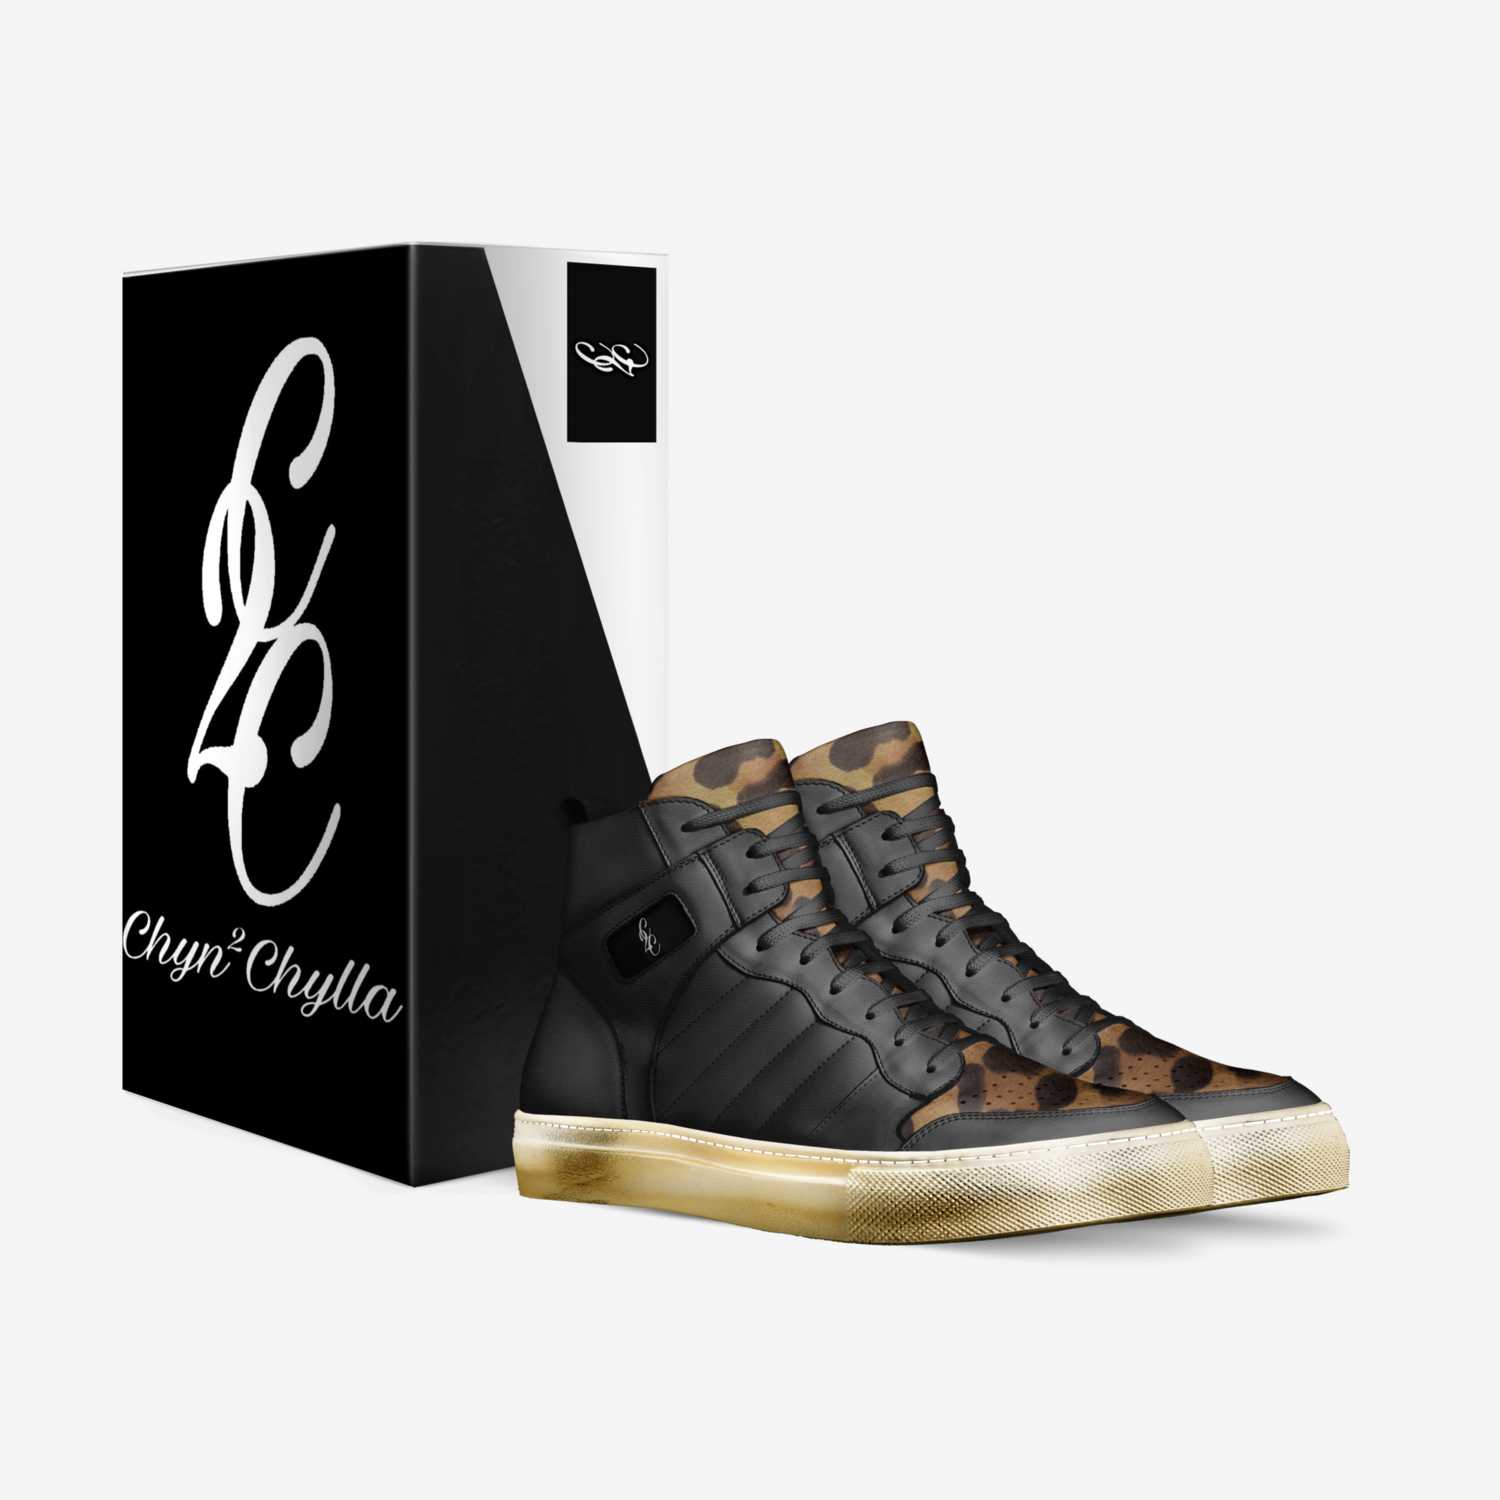 CHYLL GODZ 713 custom made in Italy shoes by Chyn² Chylla | Box view